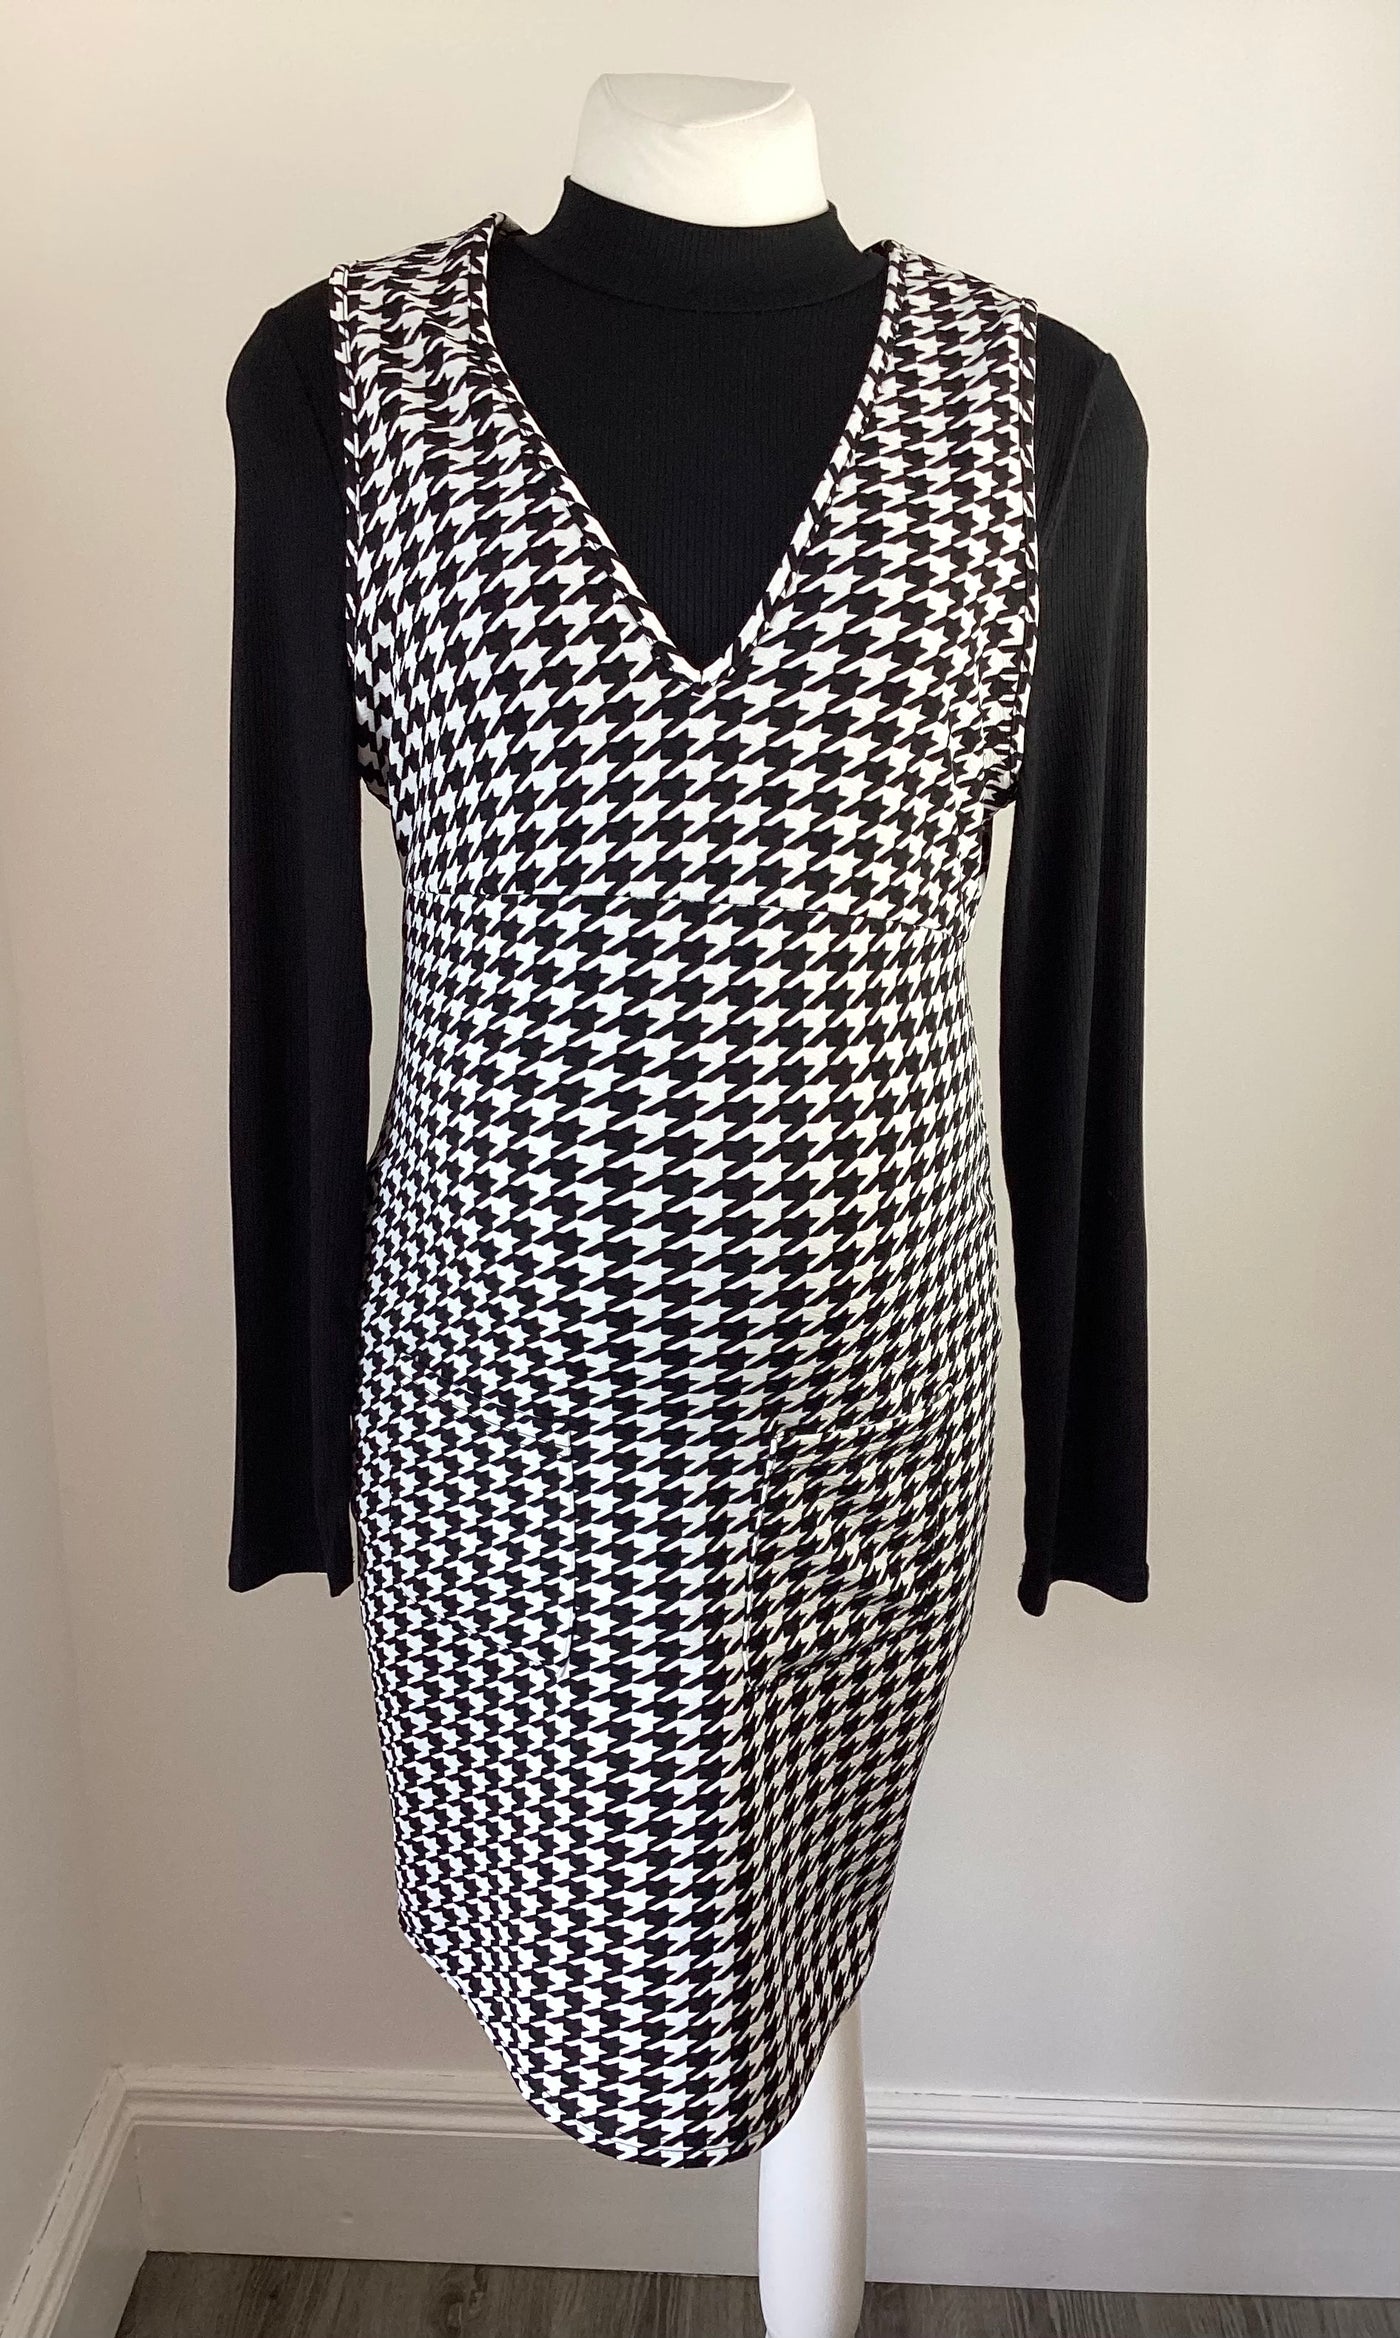 Shein Maternity black & white dogtooth print 2 piece outfit (dress and top) - Size L (Approx UK 12)